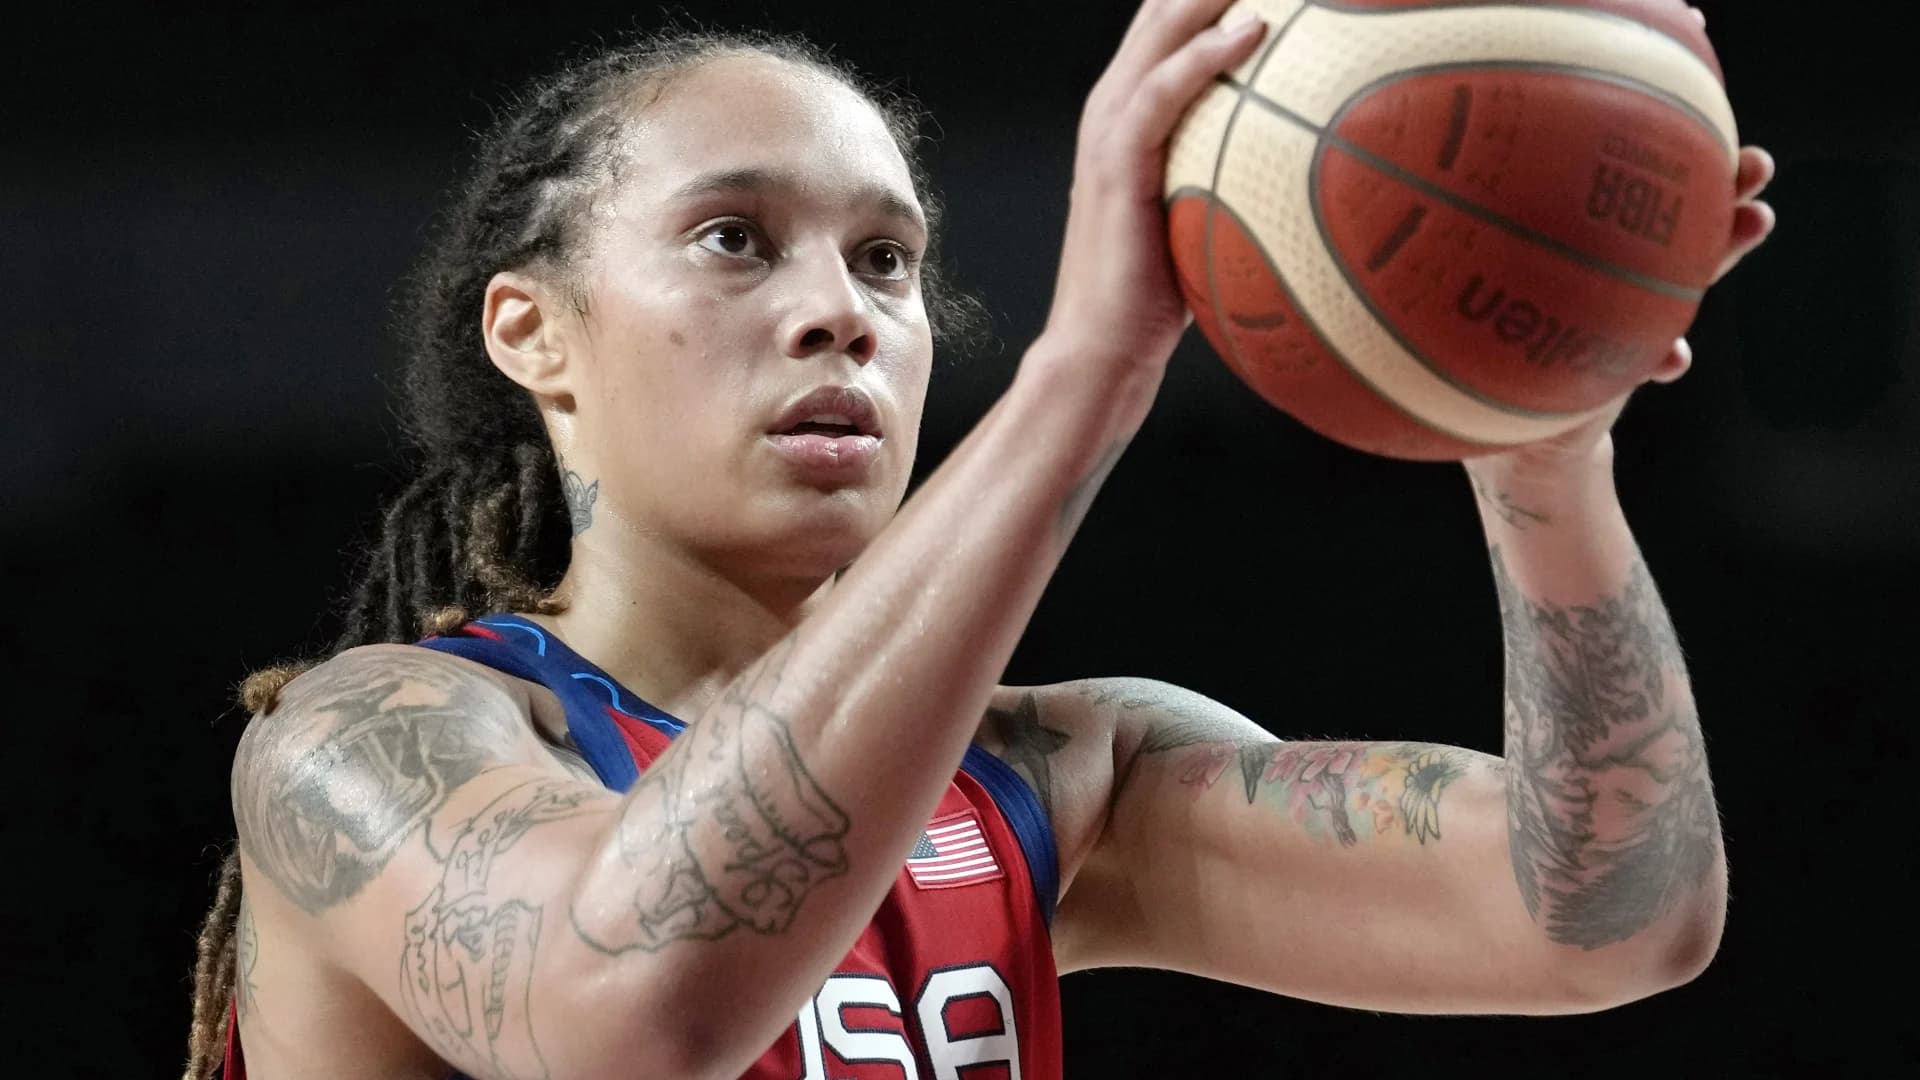 Russian court rejects Griner appeal against 9-year sentence